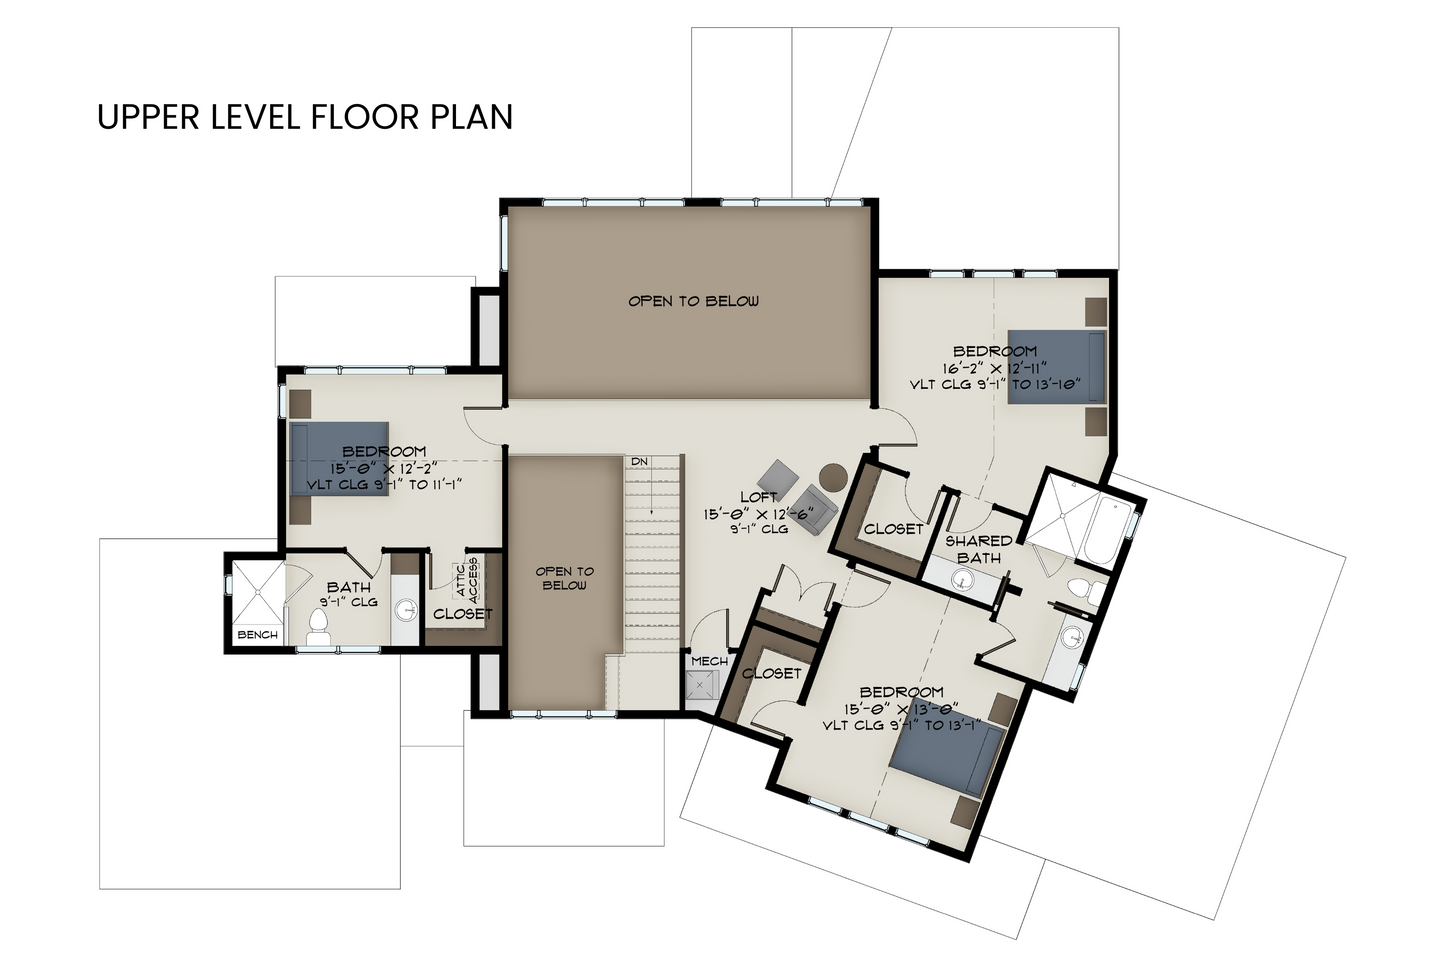 Modern-House-Plan-with-Four-Bedrooms-Upper-Level-Floor-Plan-Rocky-Mountain-Plan-Company-Citadel-Peaks